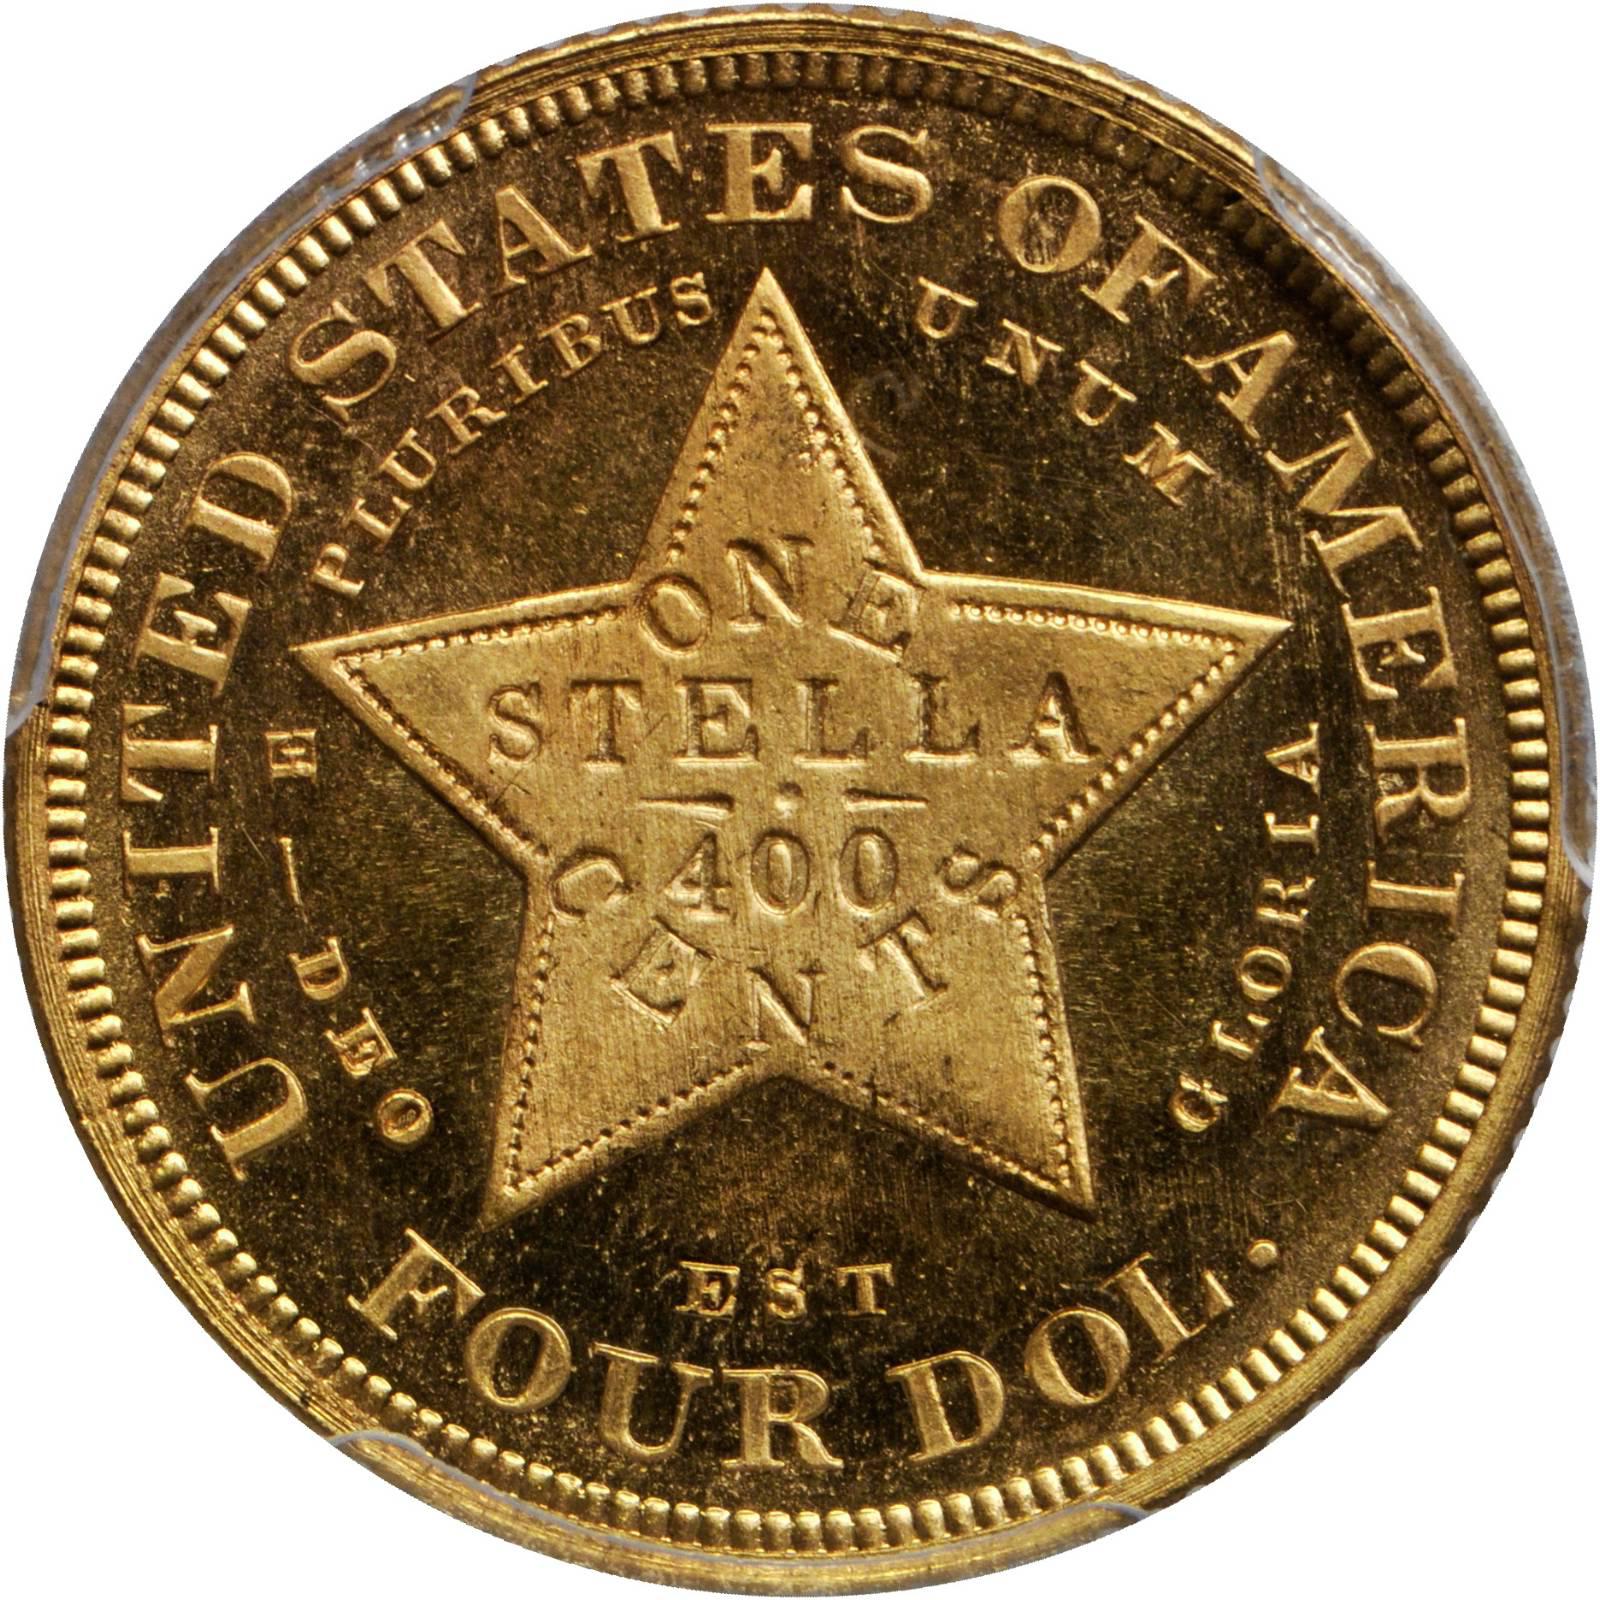 1879 Stella Gold $4 Flowing Hair Four Dollar Piece - Early Gold